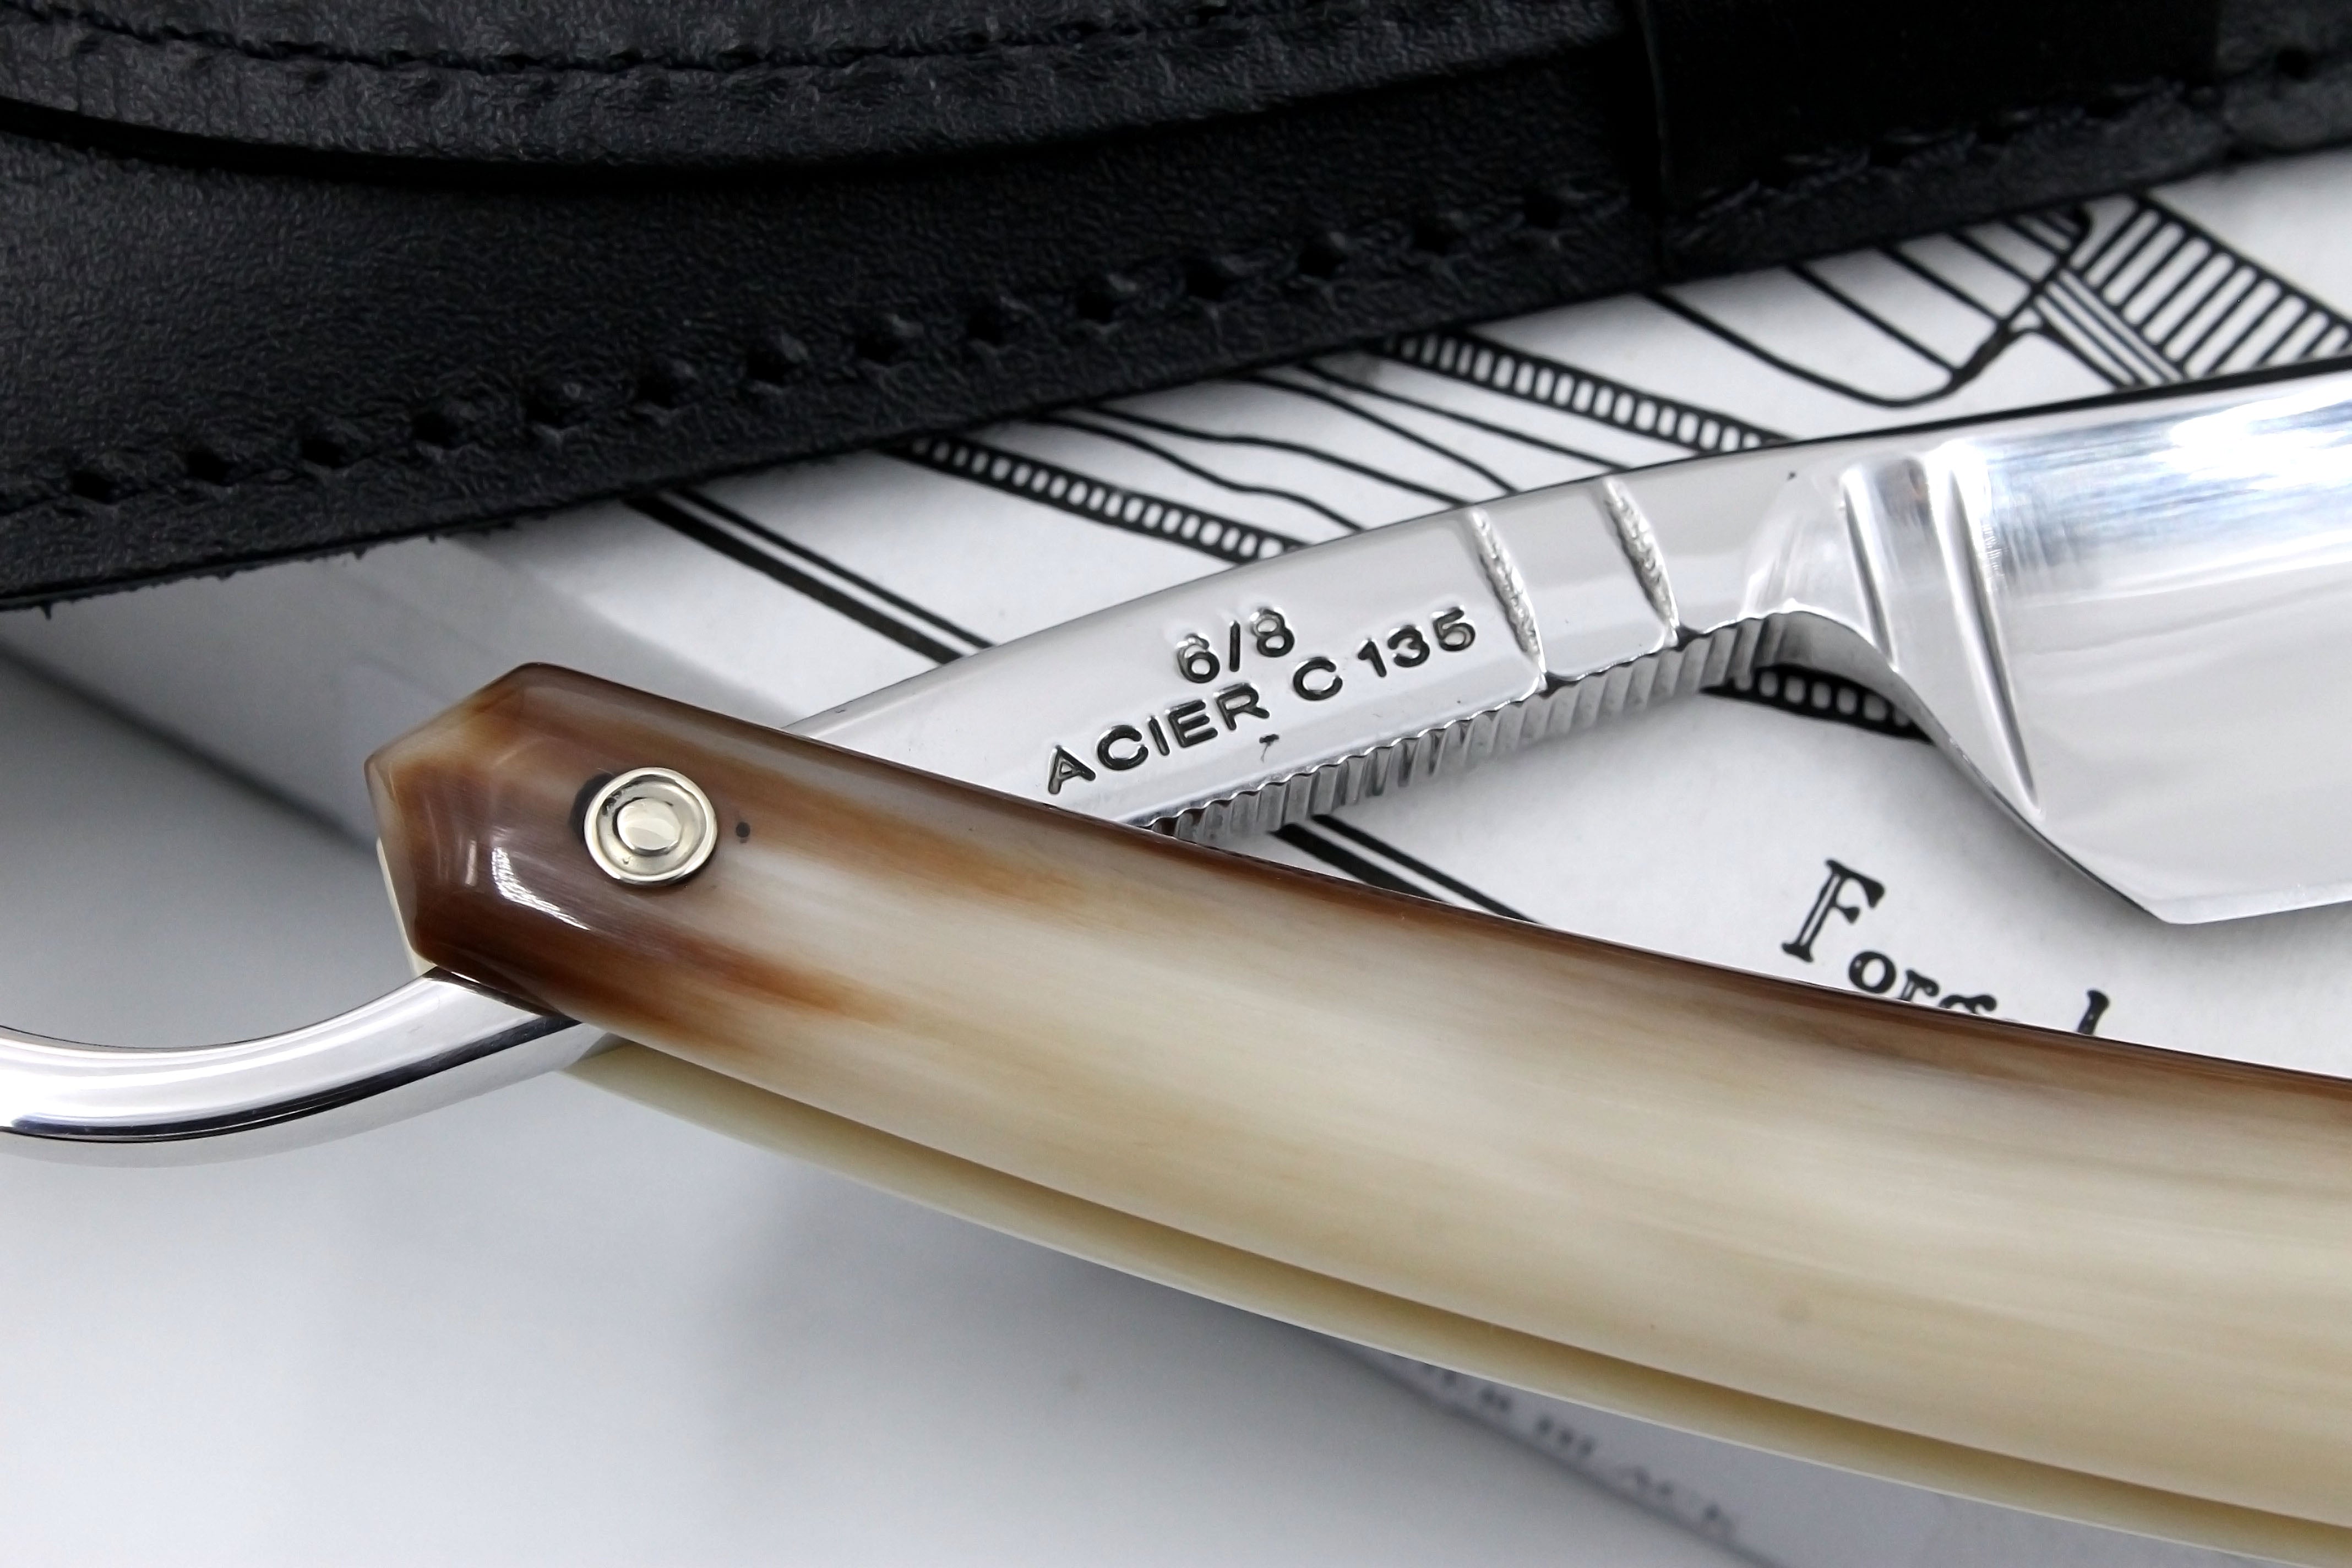 Thiers Issard 6/8 "Spartacus" Etch - Blond Horn Scales - Full Hollow Straight Razor